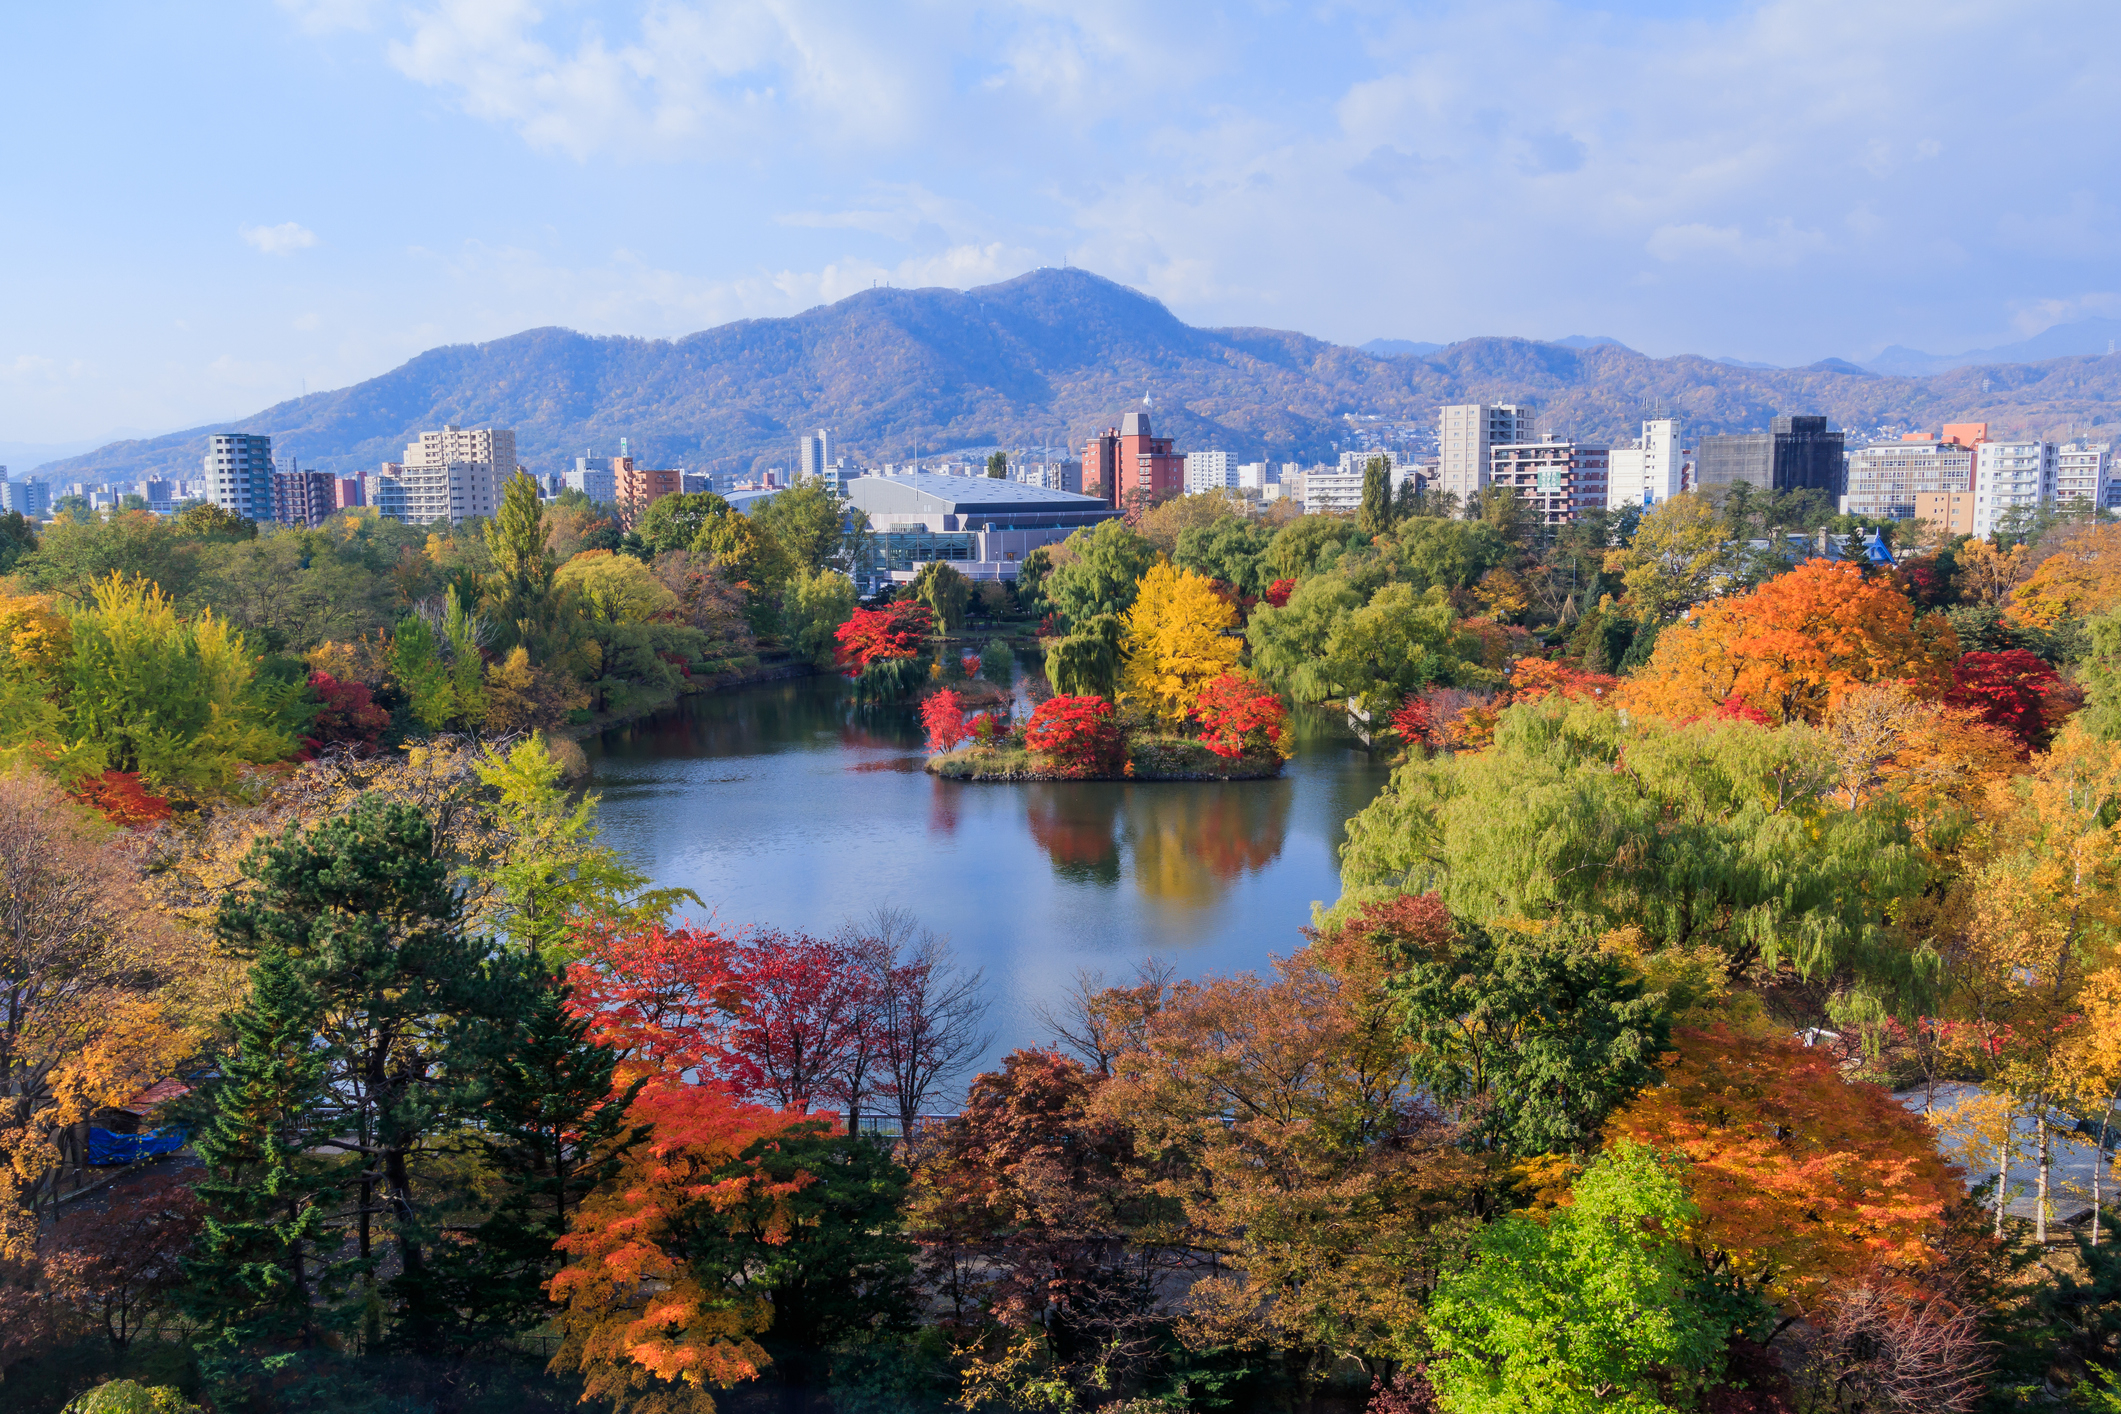 Autumn leaves around a pond with cityscape and mountains in background